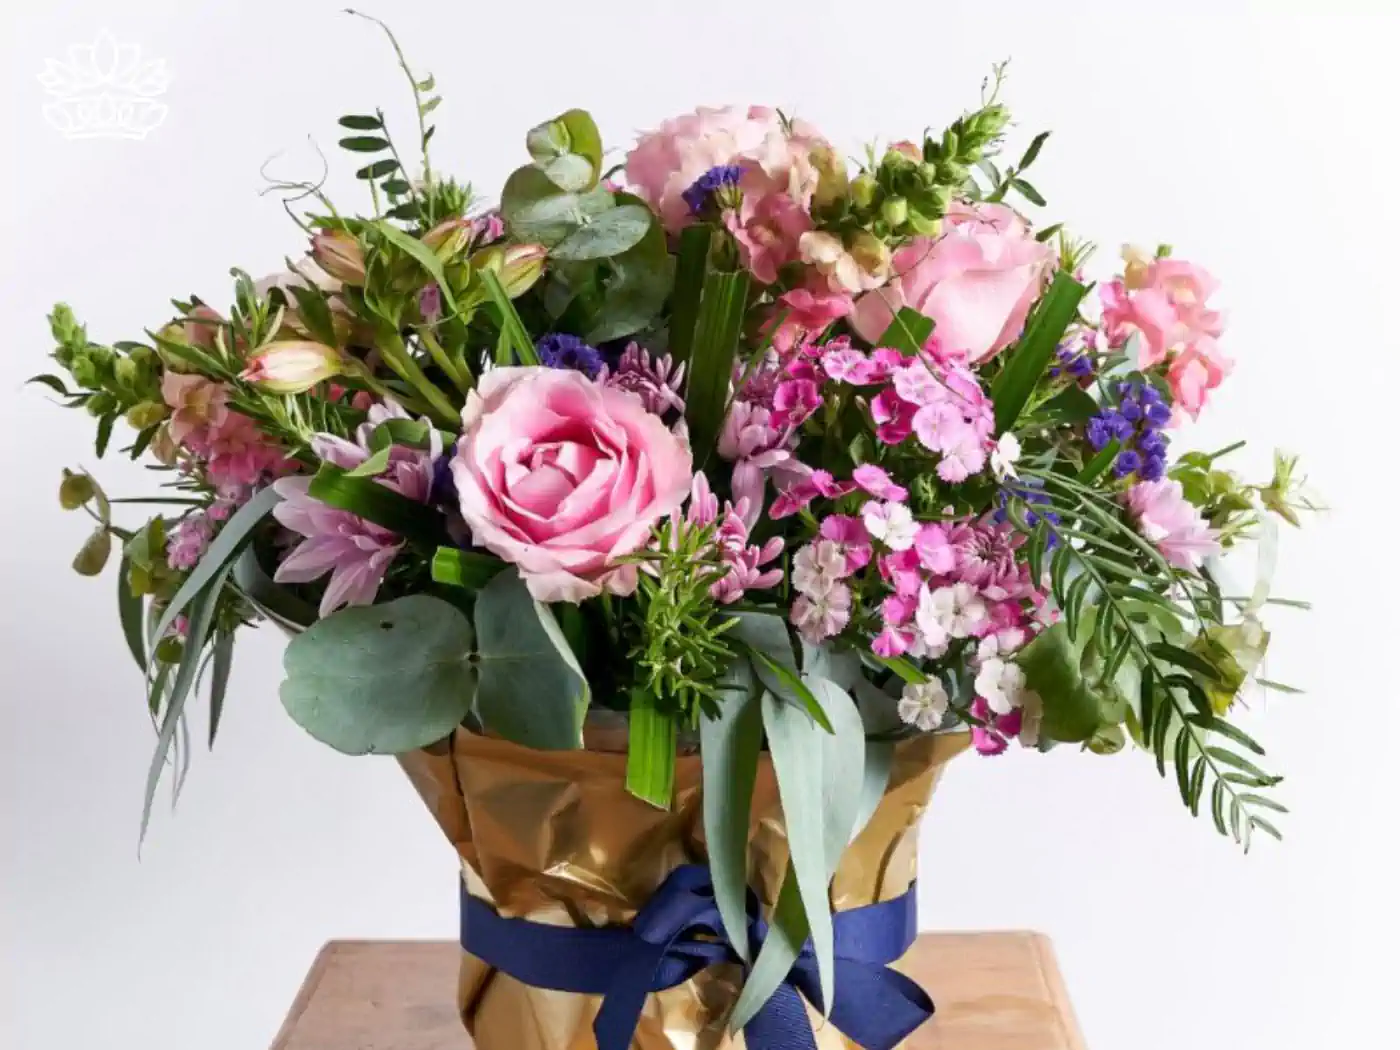 Elegant bouquet of soft pink roses, delicate purple asters, and lush greenery, wrapped in golden paper with a navy blue ribbon